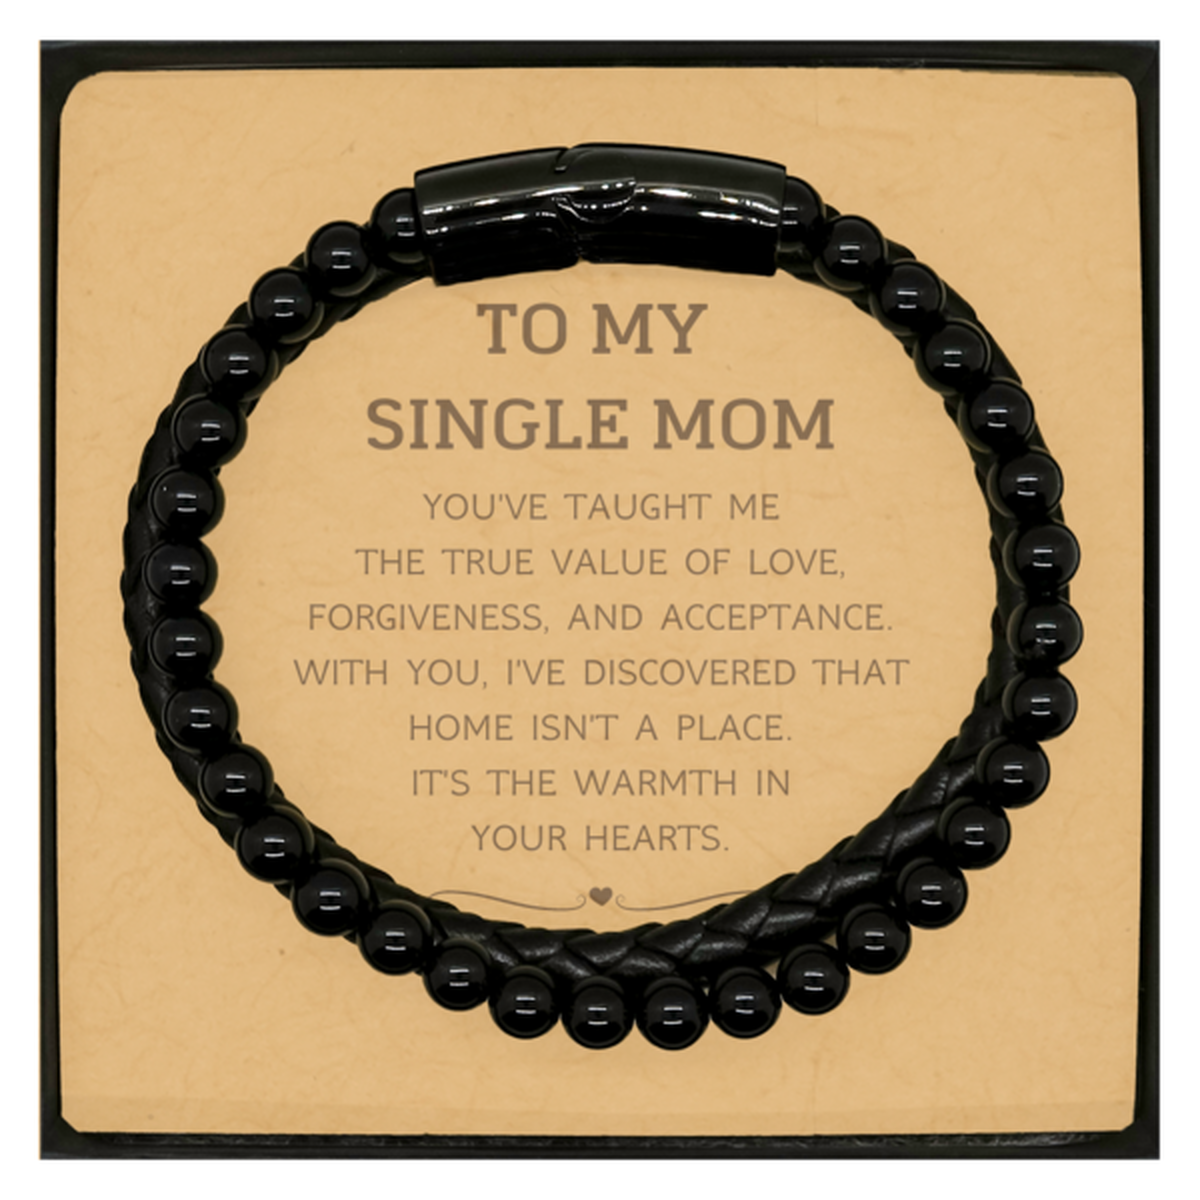 To My Single Mom Gifts, You've taught me the true value of love, Thank You Gifts For Single Mom, Birthday Christmas Stone Leather Bracelets For Single Mom